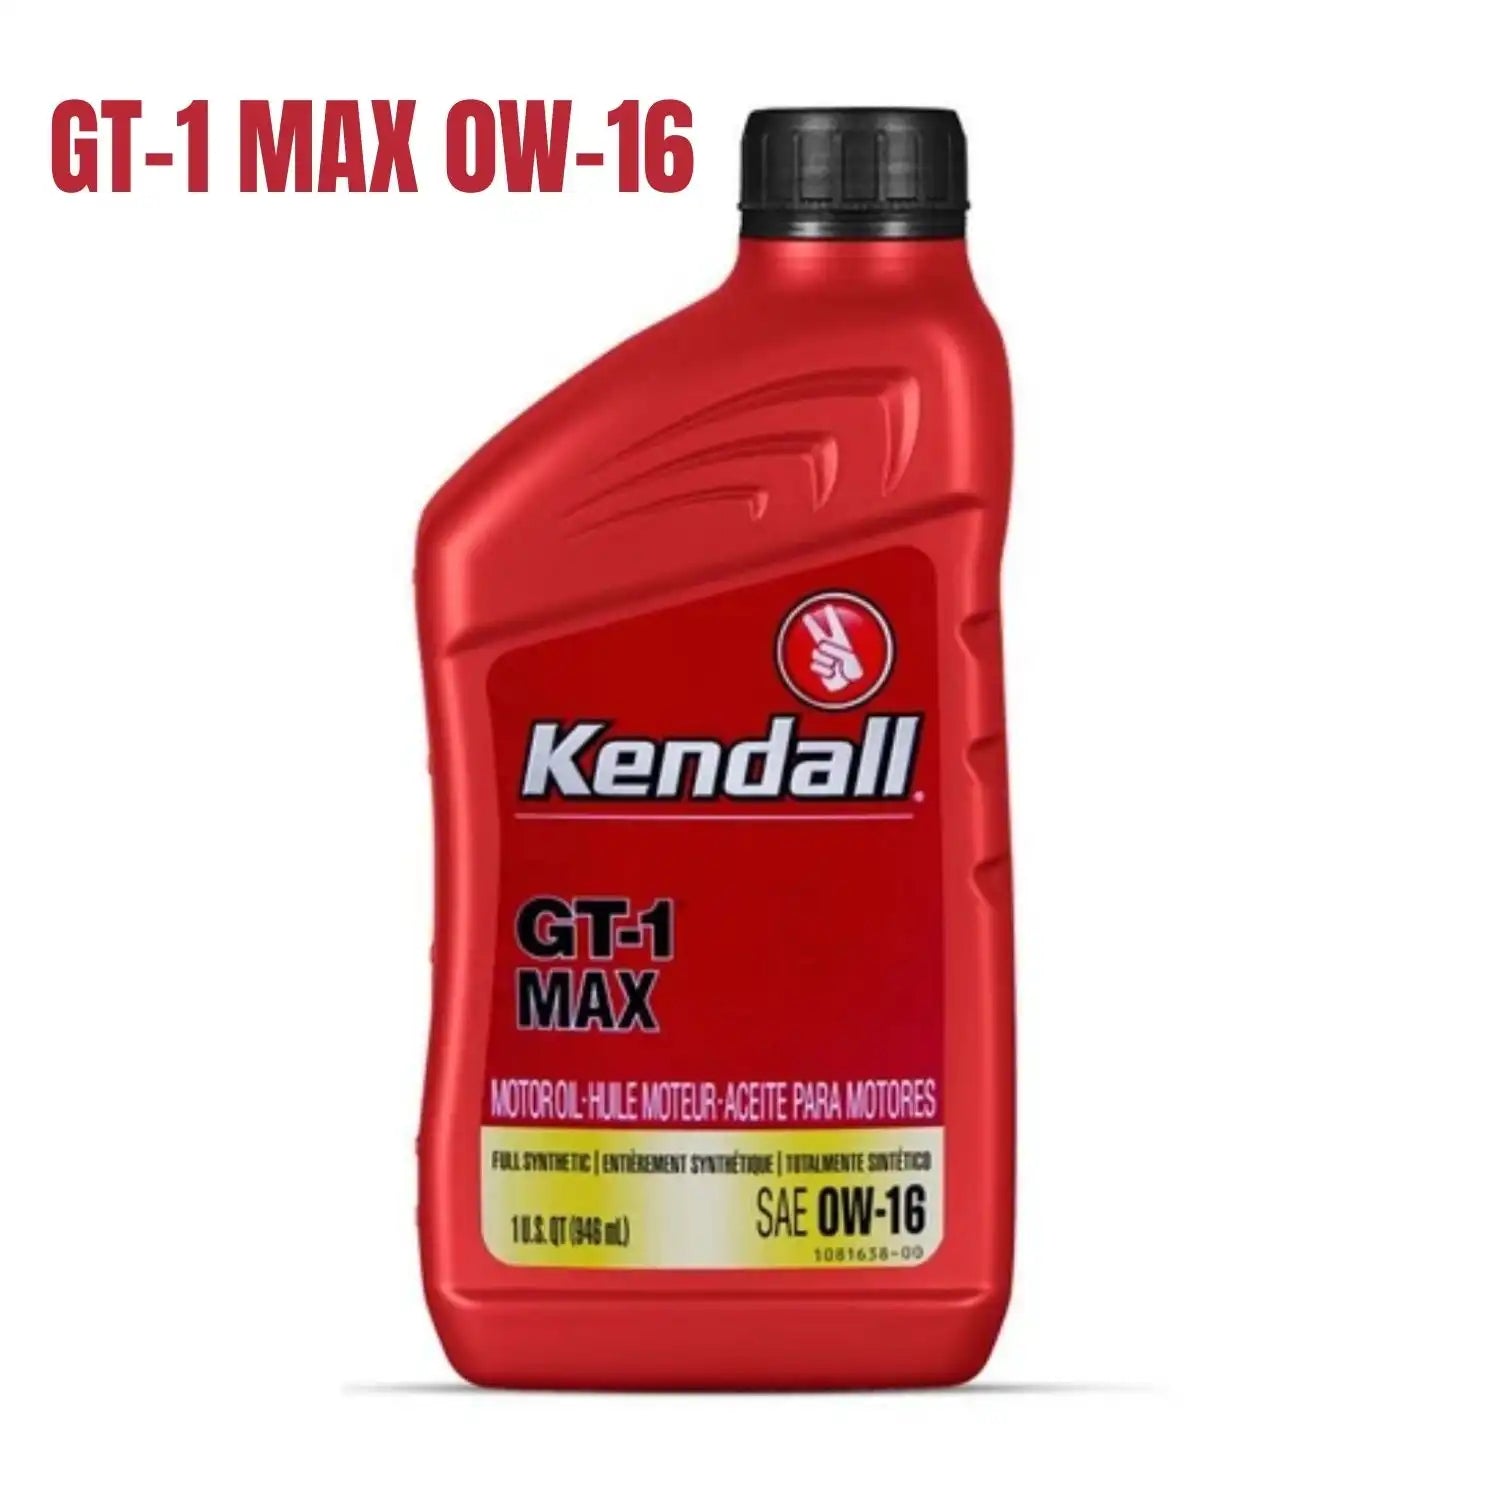 Kendall Gt-1 0w16 Max Full-Synthetic Car Engine Oil 946ml